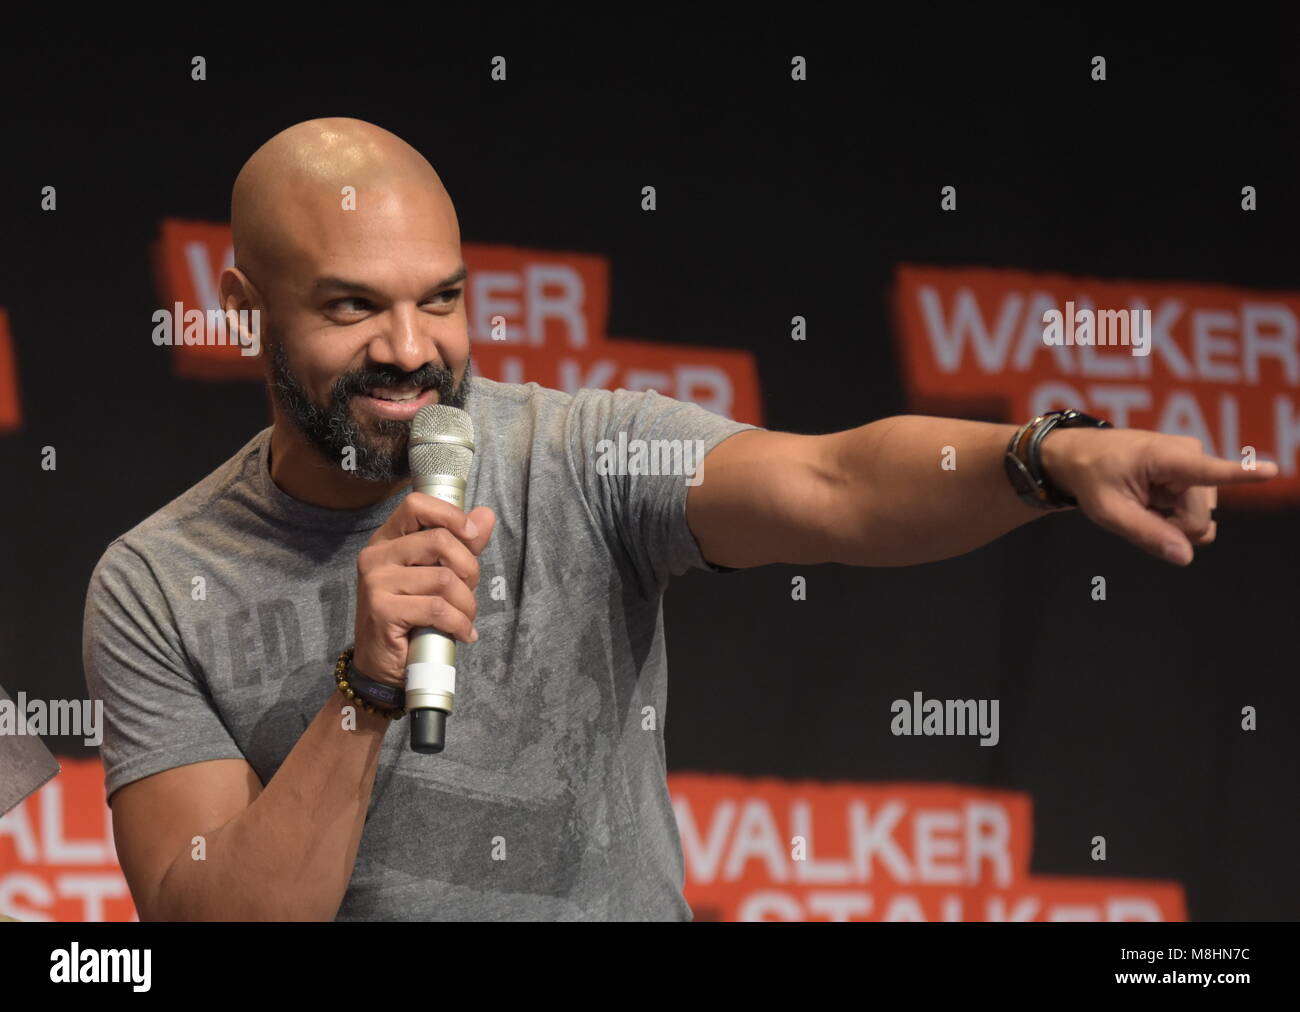 MANNHEIM, GERMANY - MARCH 17: Actor Khary Payton (Ezekiel on The Walking Dead) at the Walker Stalker Germany convention. (Photo by Markus Wissmann) Stock Photo